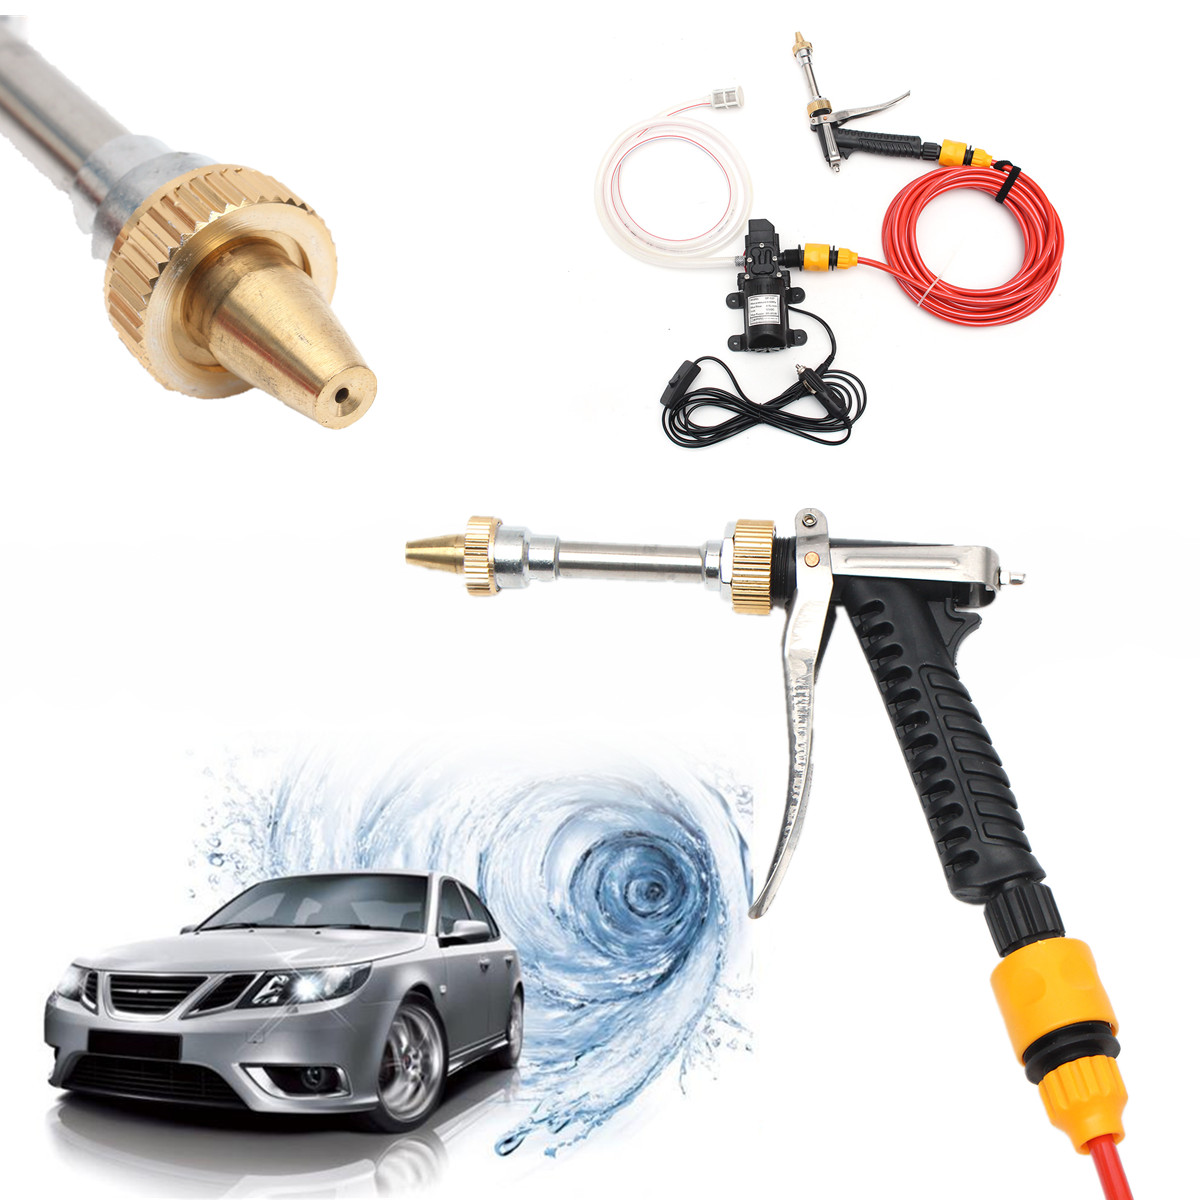 12V-60W-Electric-Car-Wash-Pump-Water-Cleaner-Washer-Pressure-Sprayer-Tool-Kit-1134729